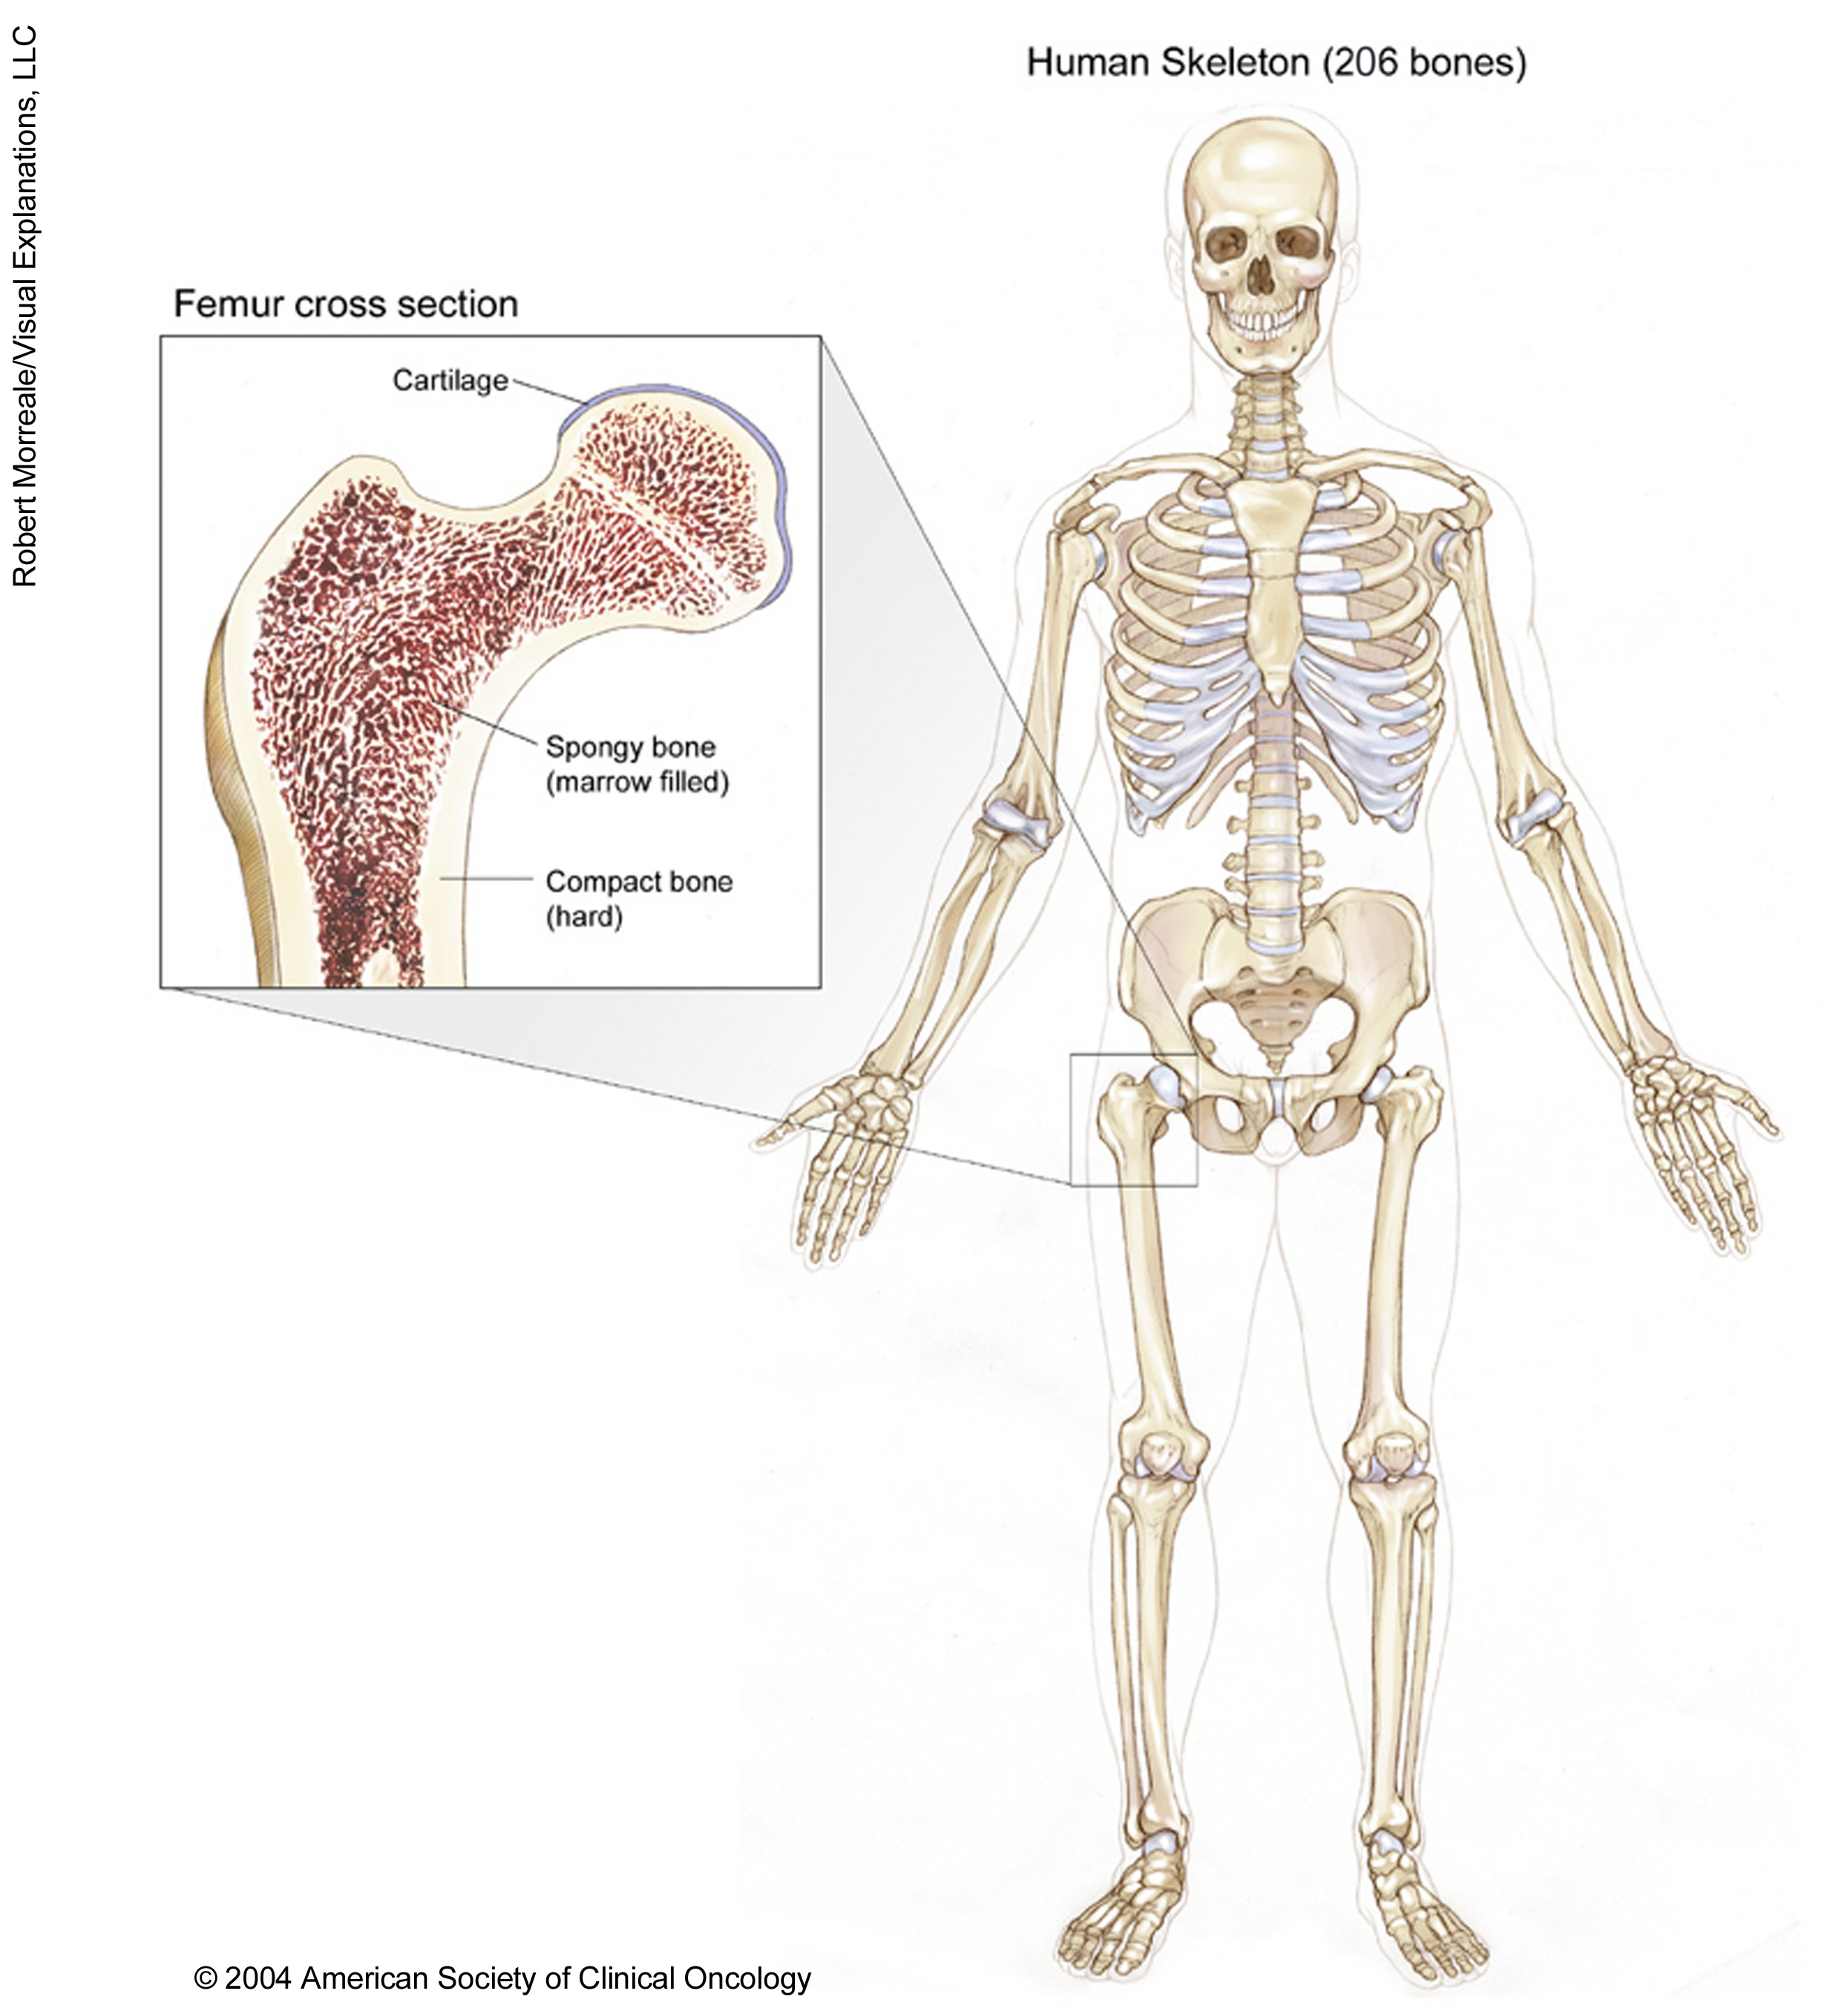 The skeletal system and a cross-section of the femur. See description for more information.